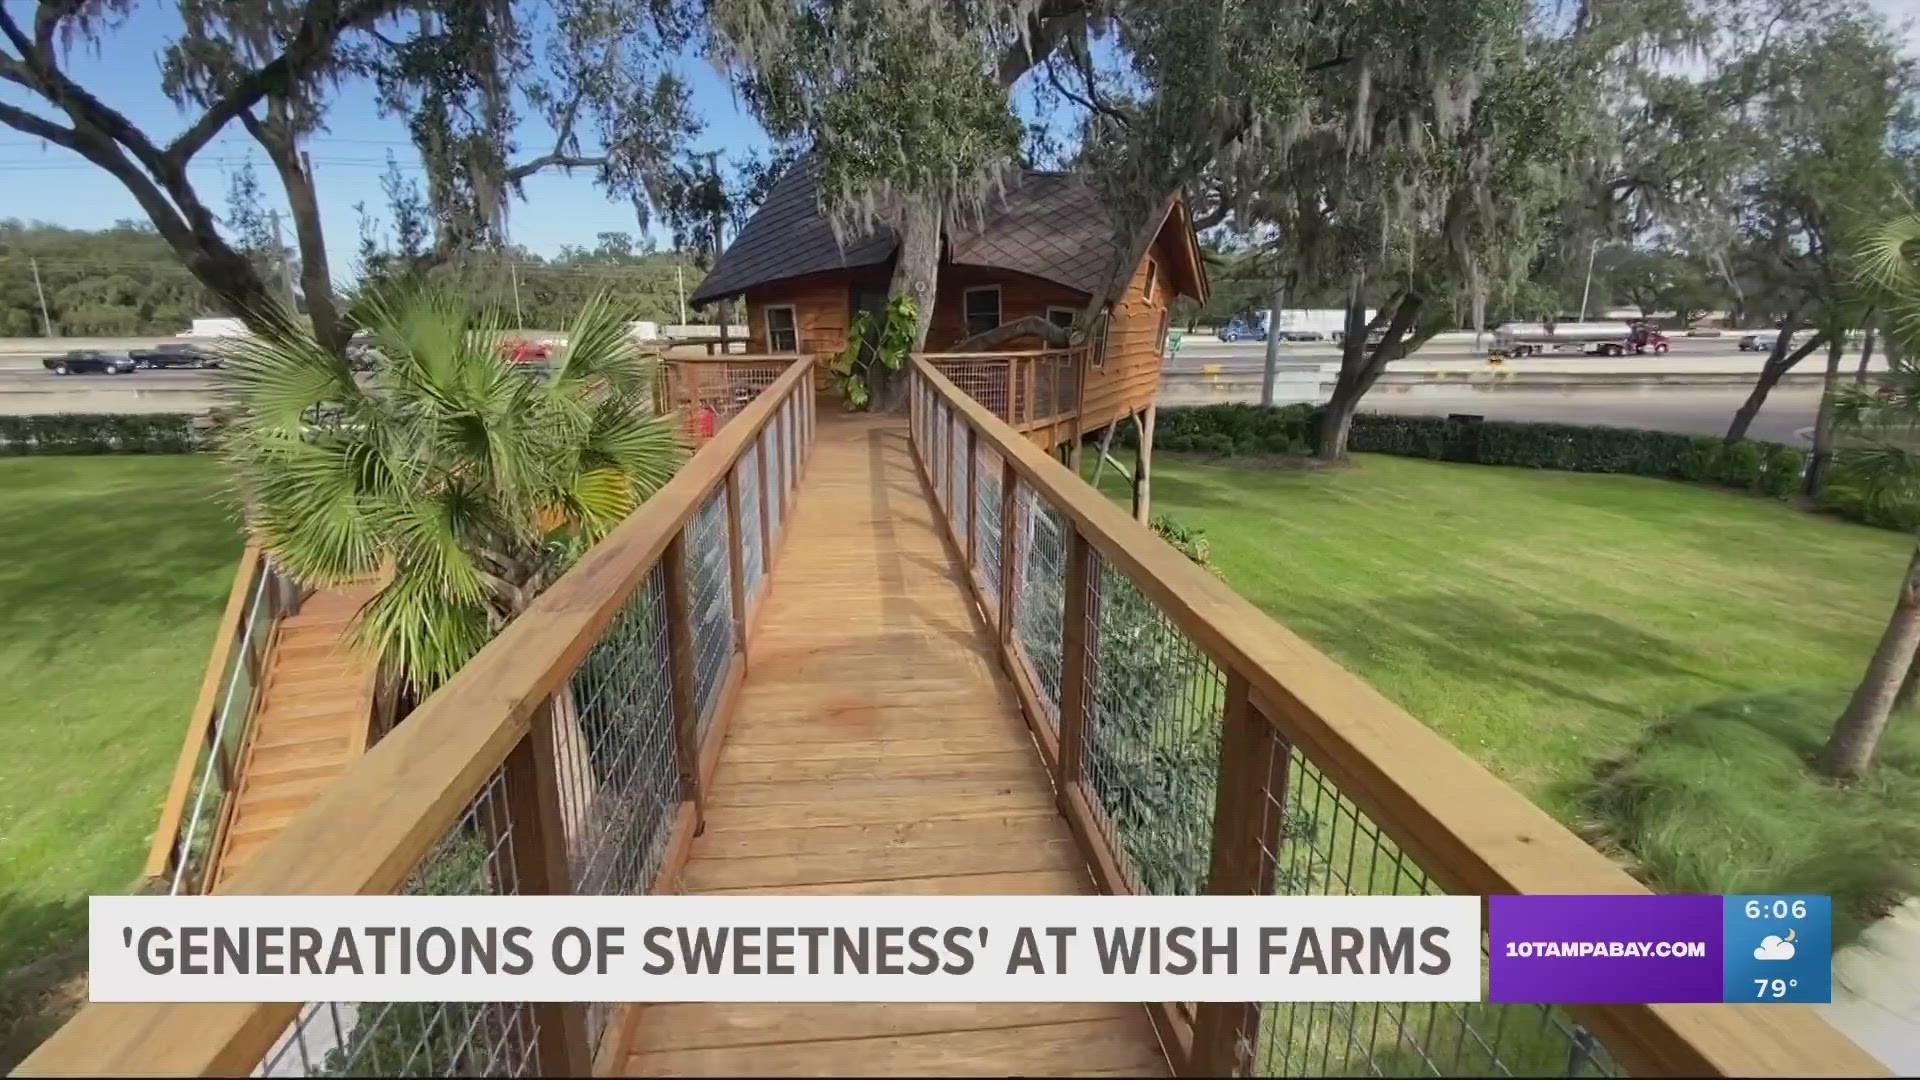 The third-generation owner of the Plant City based Wish Farms takes us through 100 years of history and his hope for the 100 years to come.